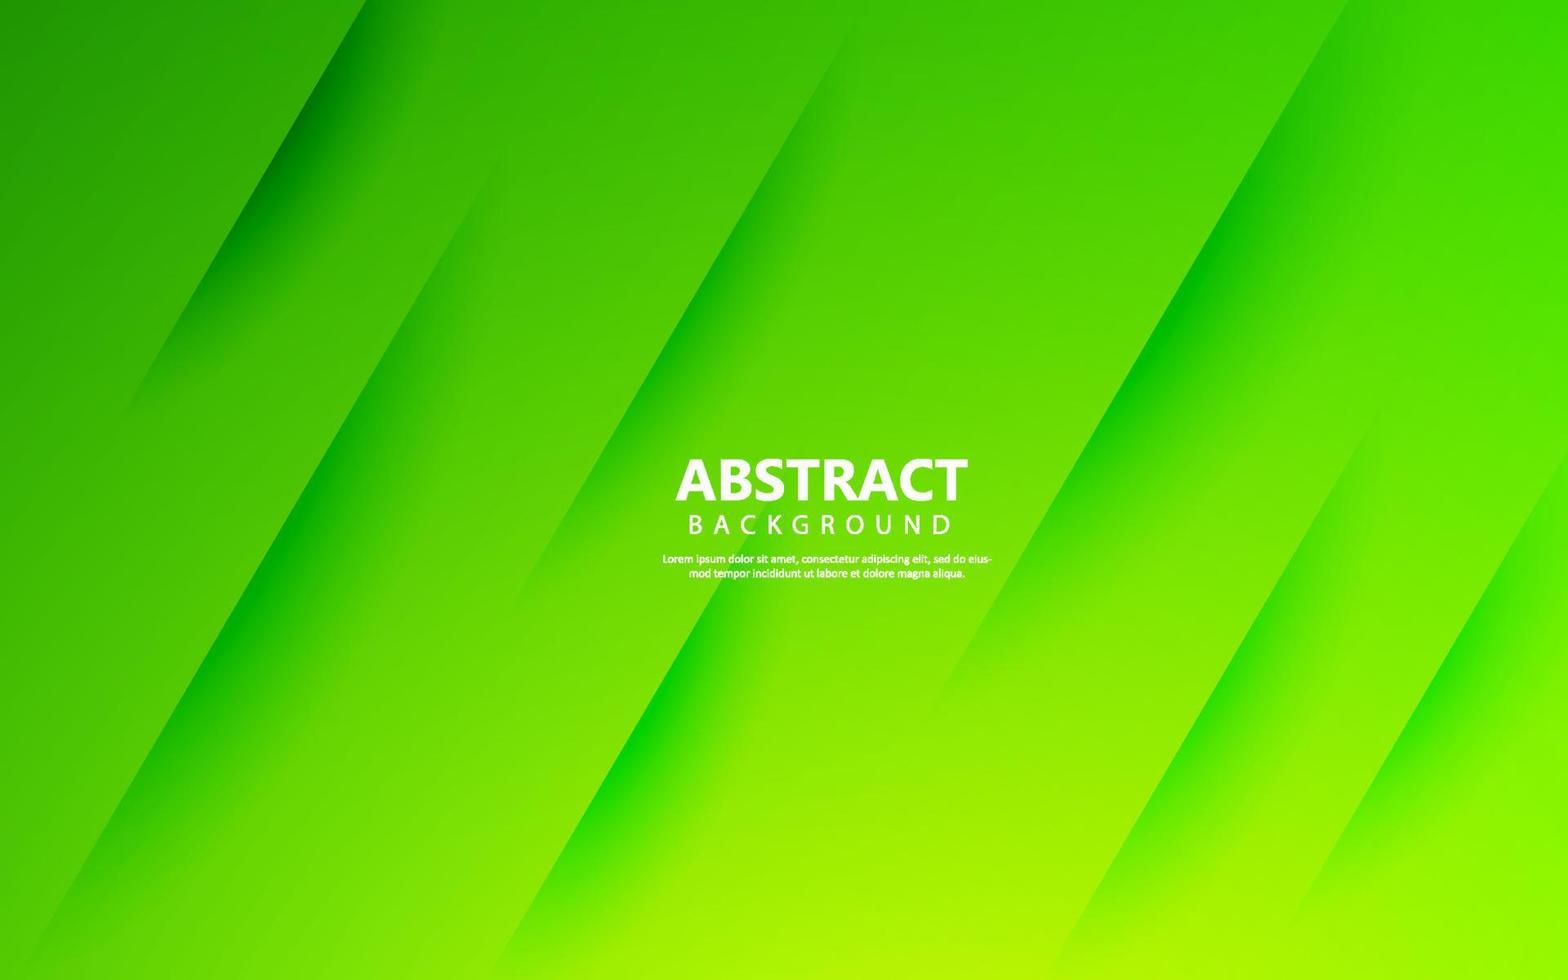 Abstract minimal green background vector